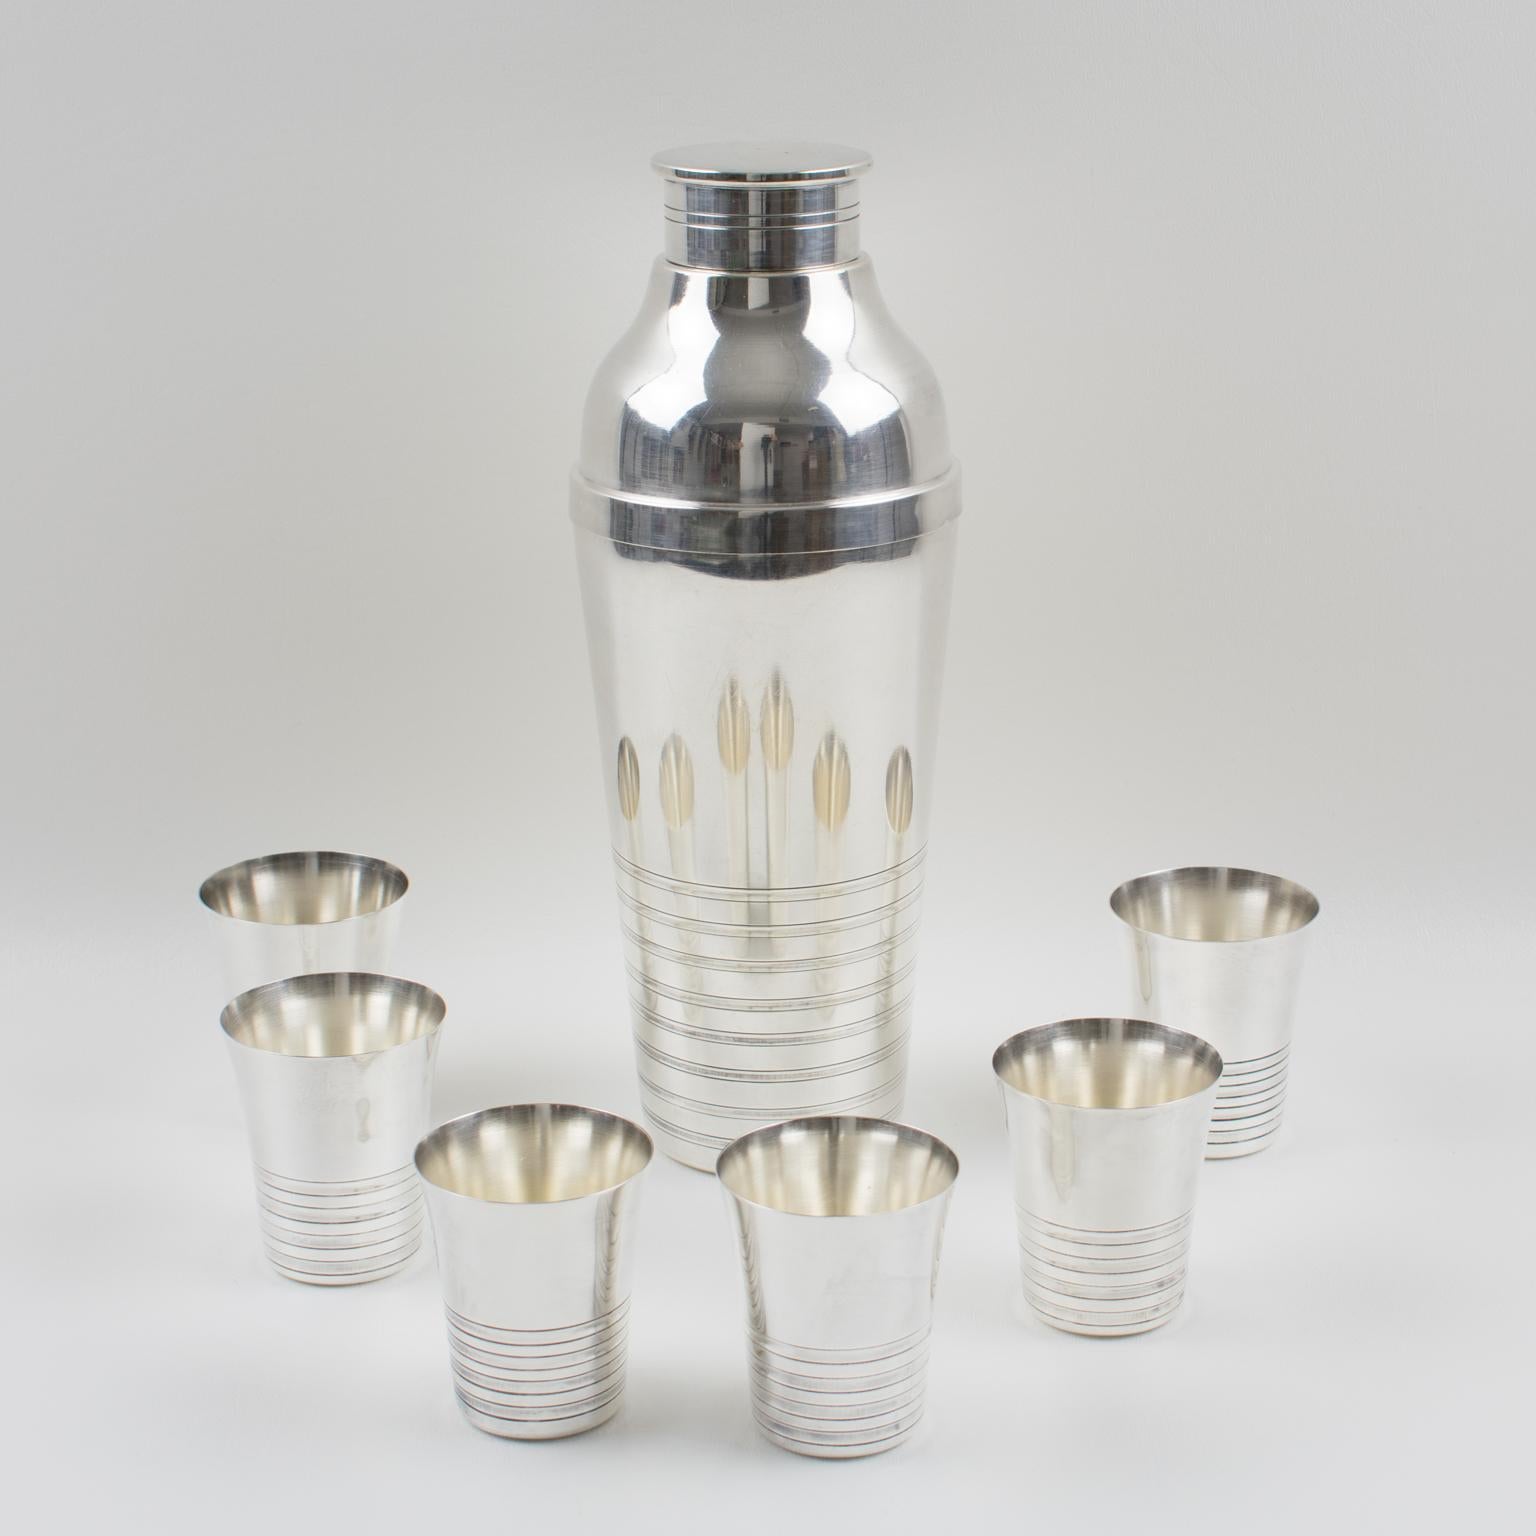 Elegant French Art Deco silver plate barware serving set by Silversmith Gouaille, Paris. Three sectioned designed cylindrical cocktail or Martini shaker with removable cap and strainer, compliment with six silver plate cocktail cups with same